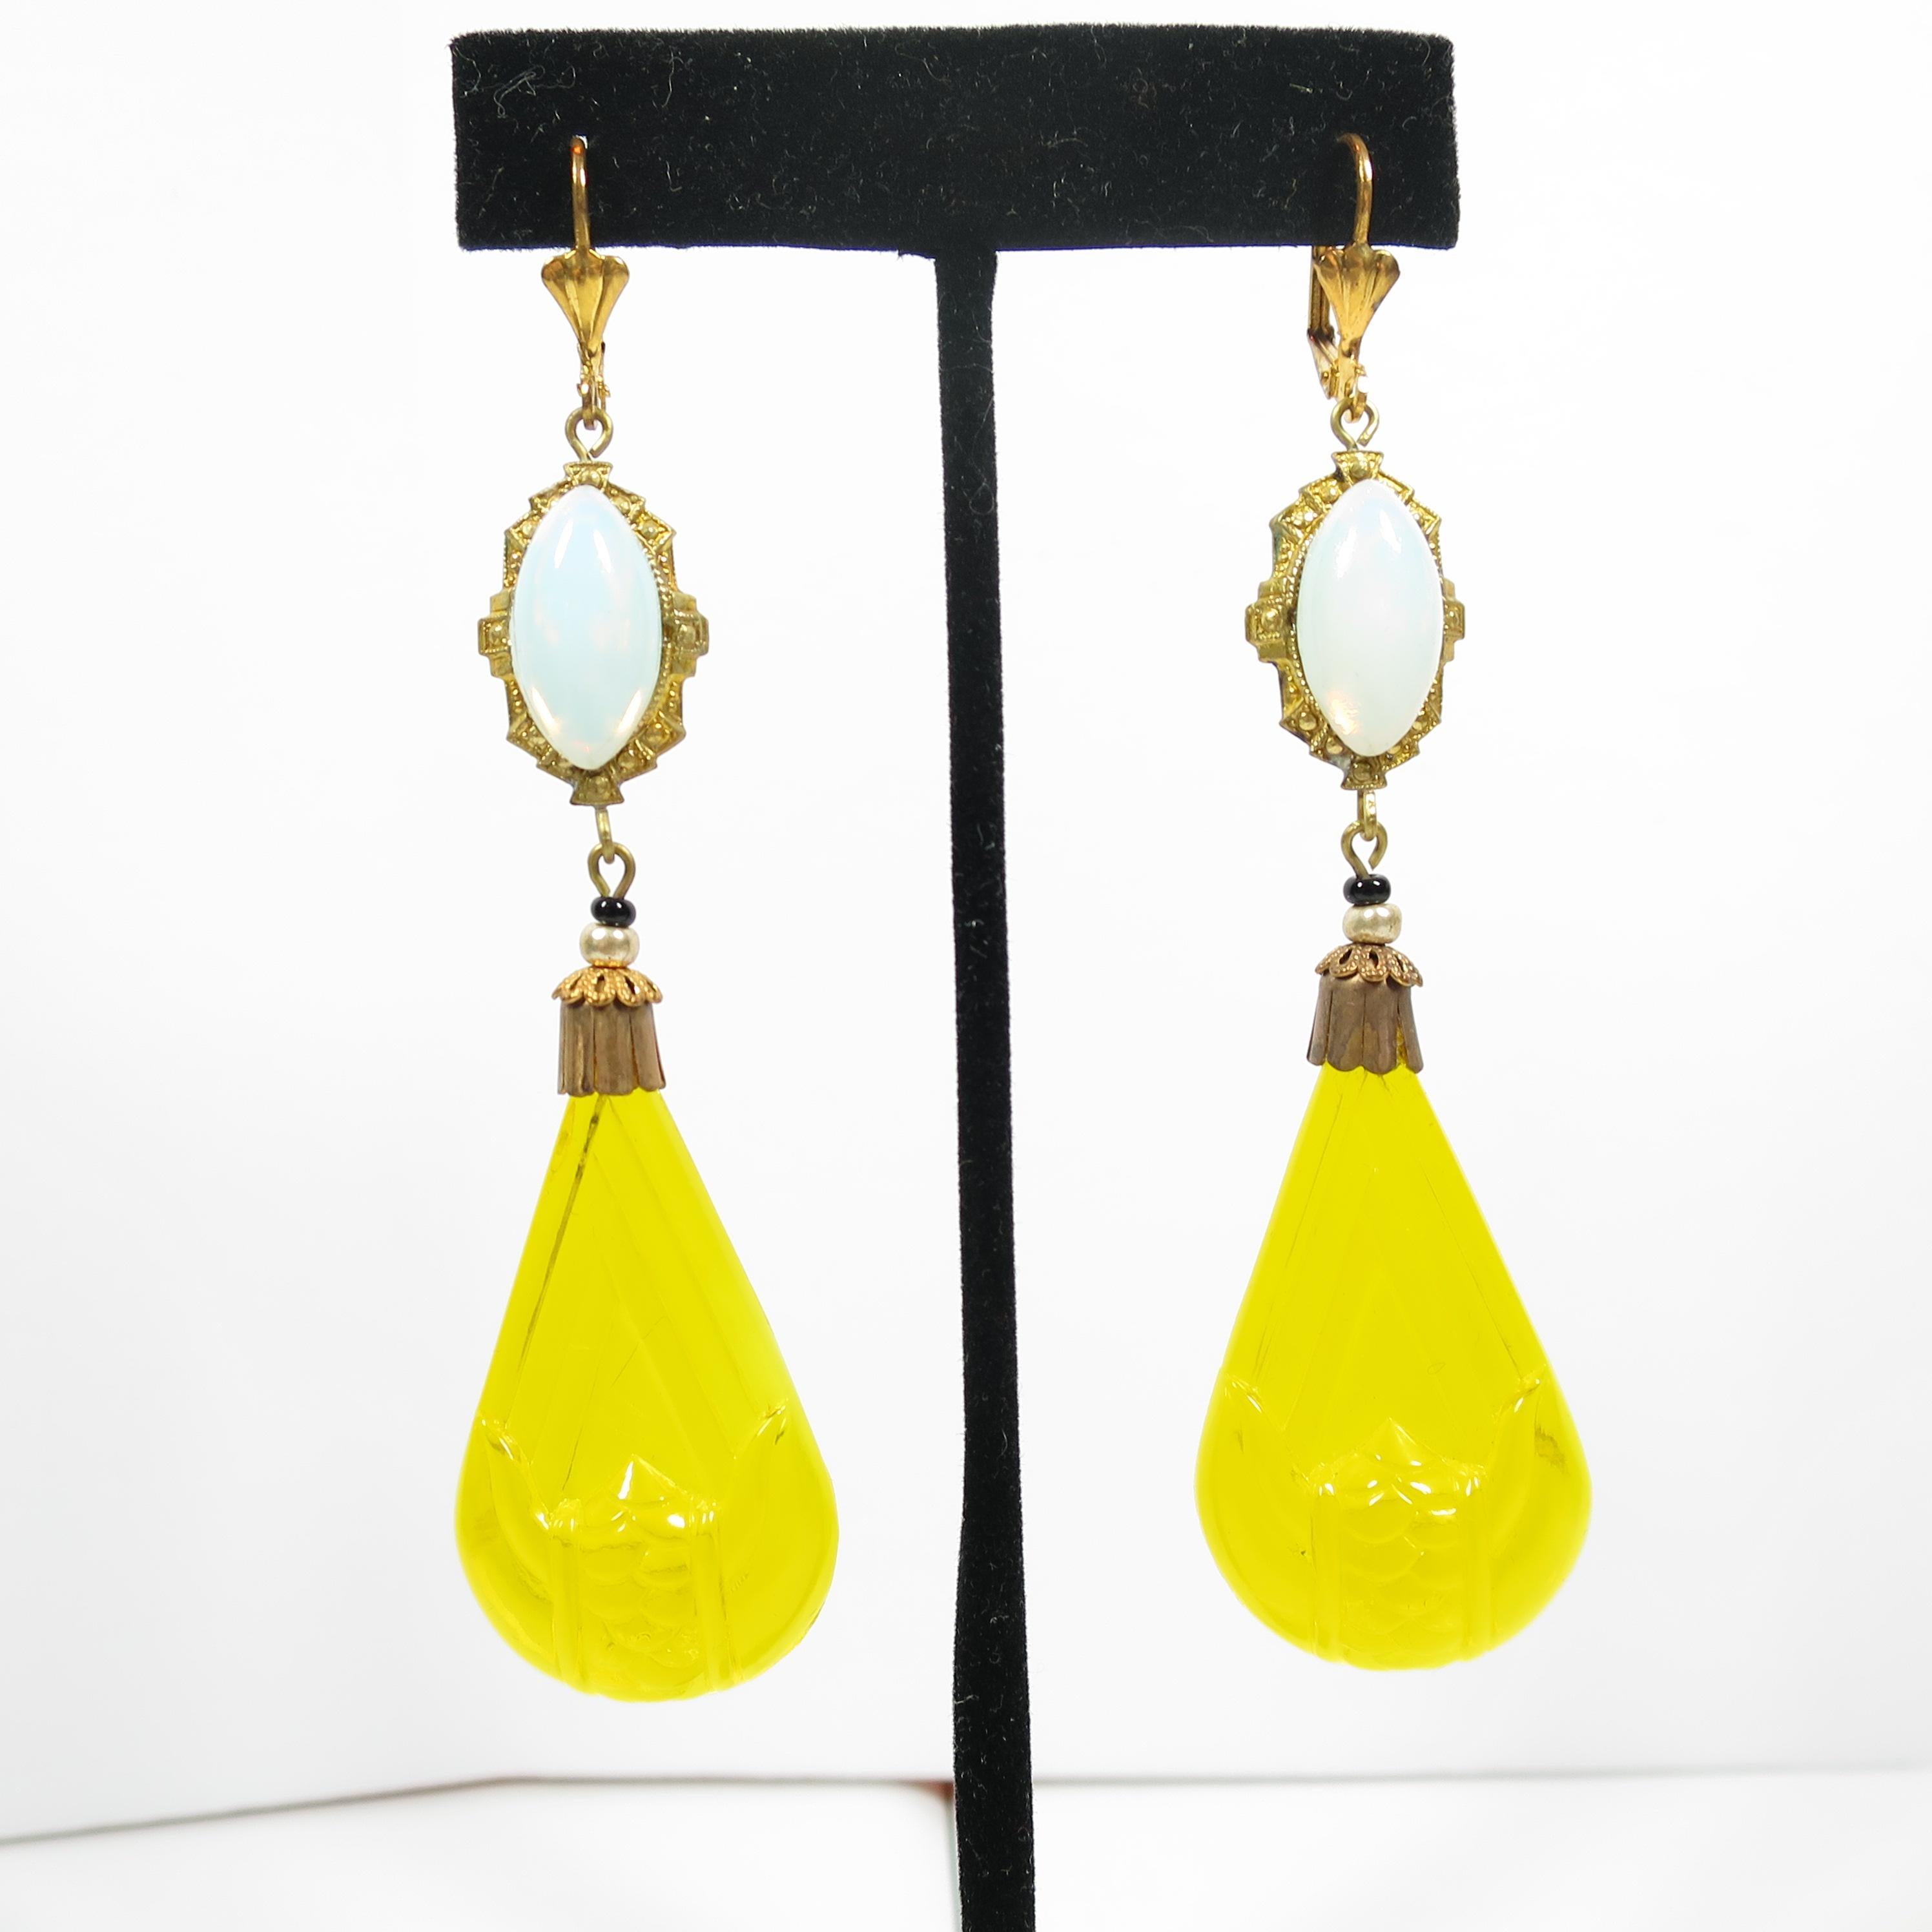 Offered here is a pair of Art Deco Czech pierced lever-back opal & citrine carved glass dangle earrings from the 1920s. The hand-soldered top portion is a gold-washed oval platform with marquise cabochons of opal art glass surrounded by geometric